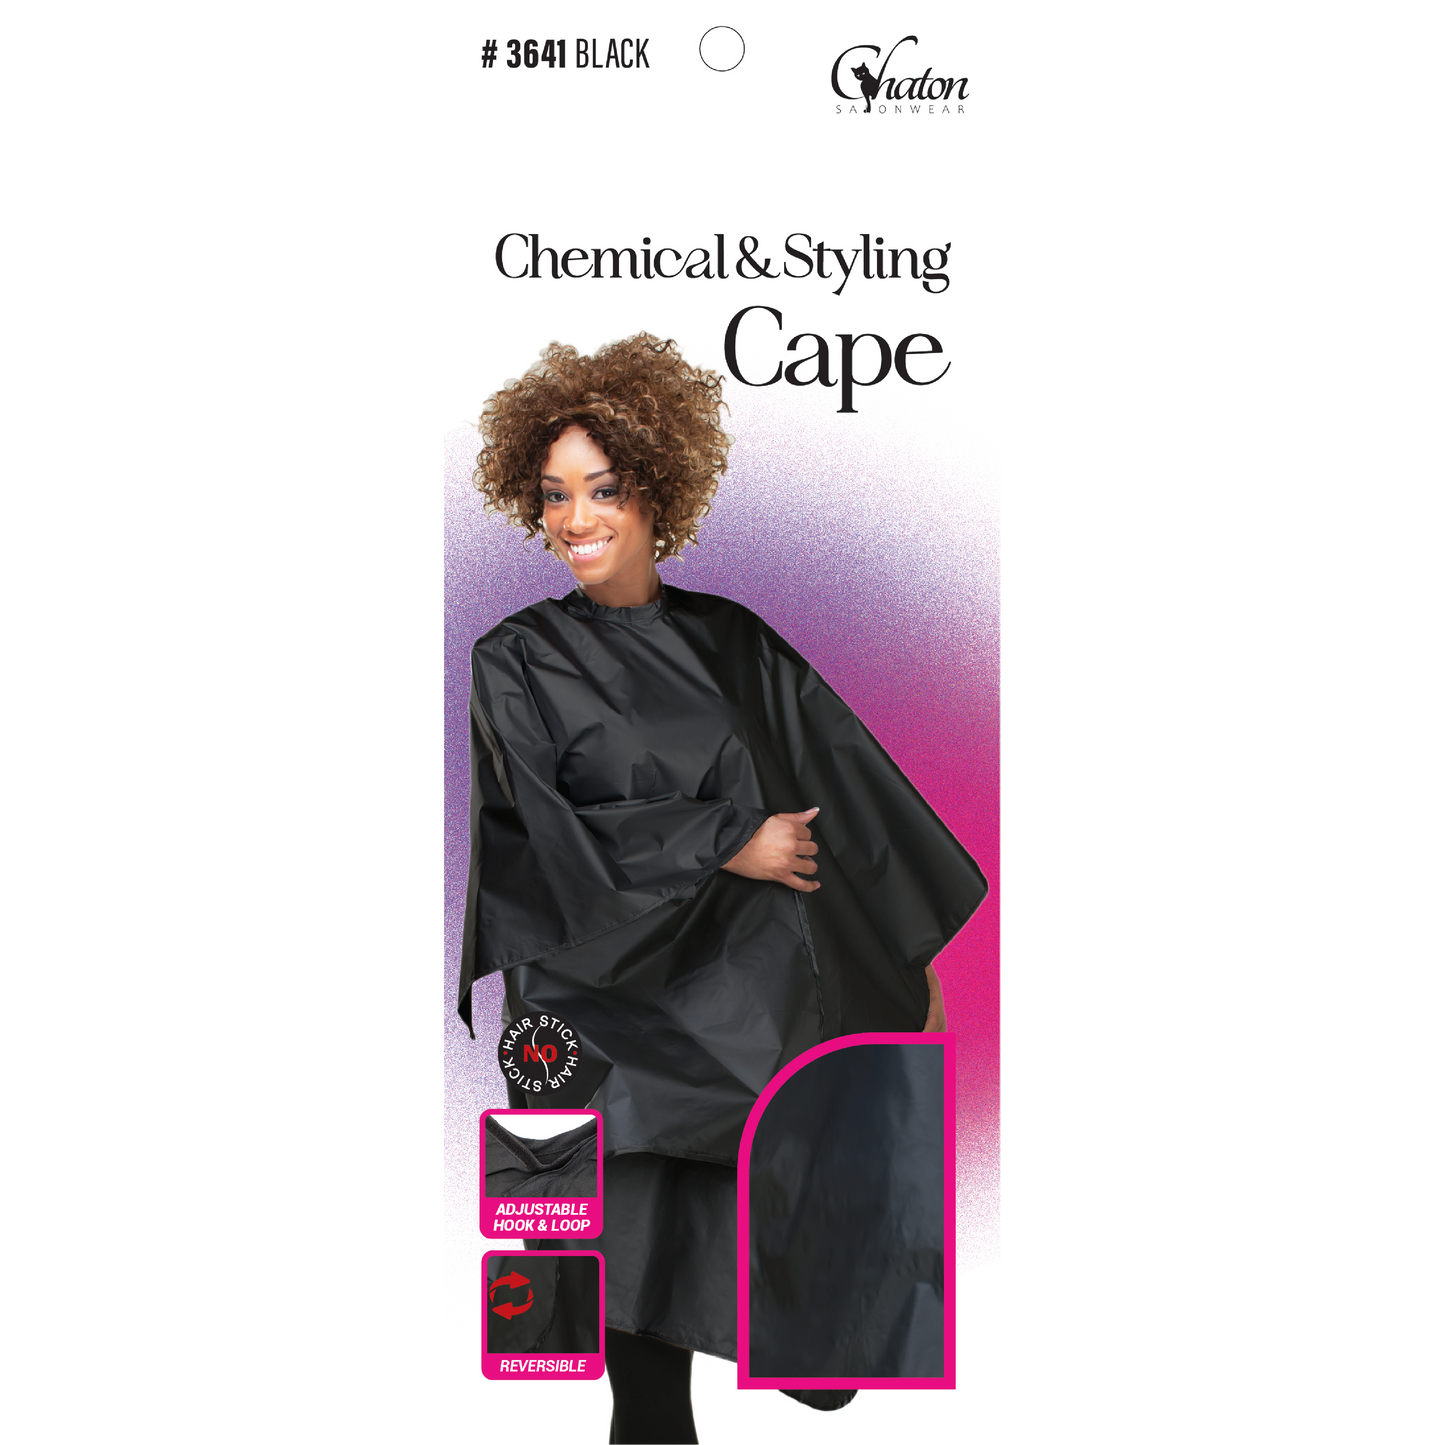 CHEMICAL & STYLING CAPE